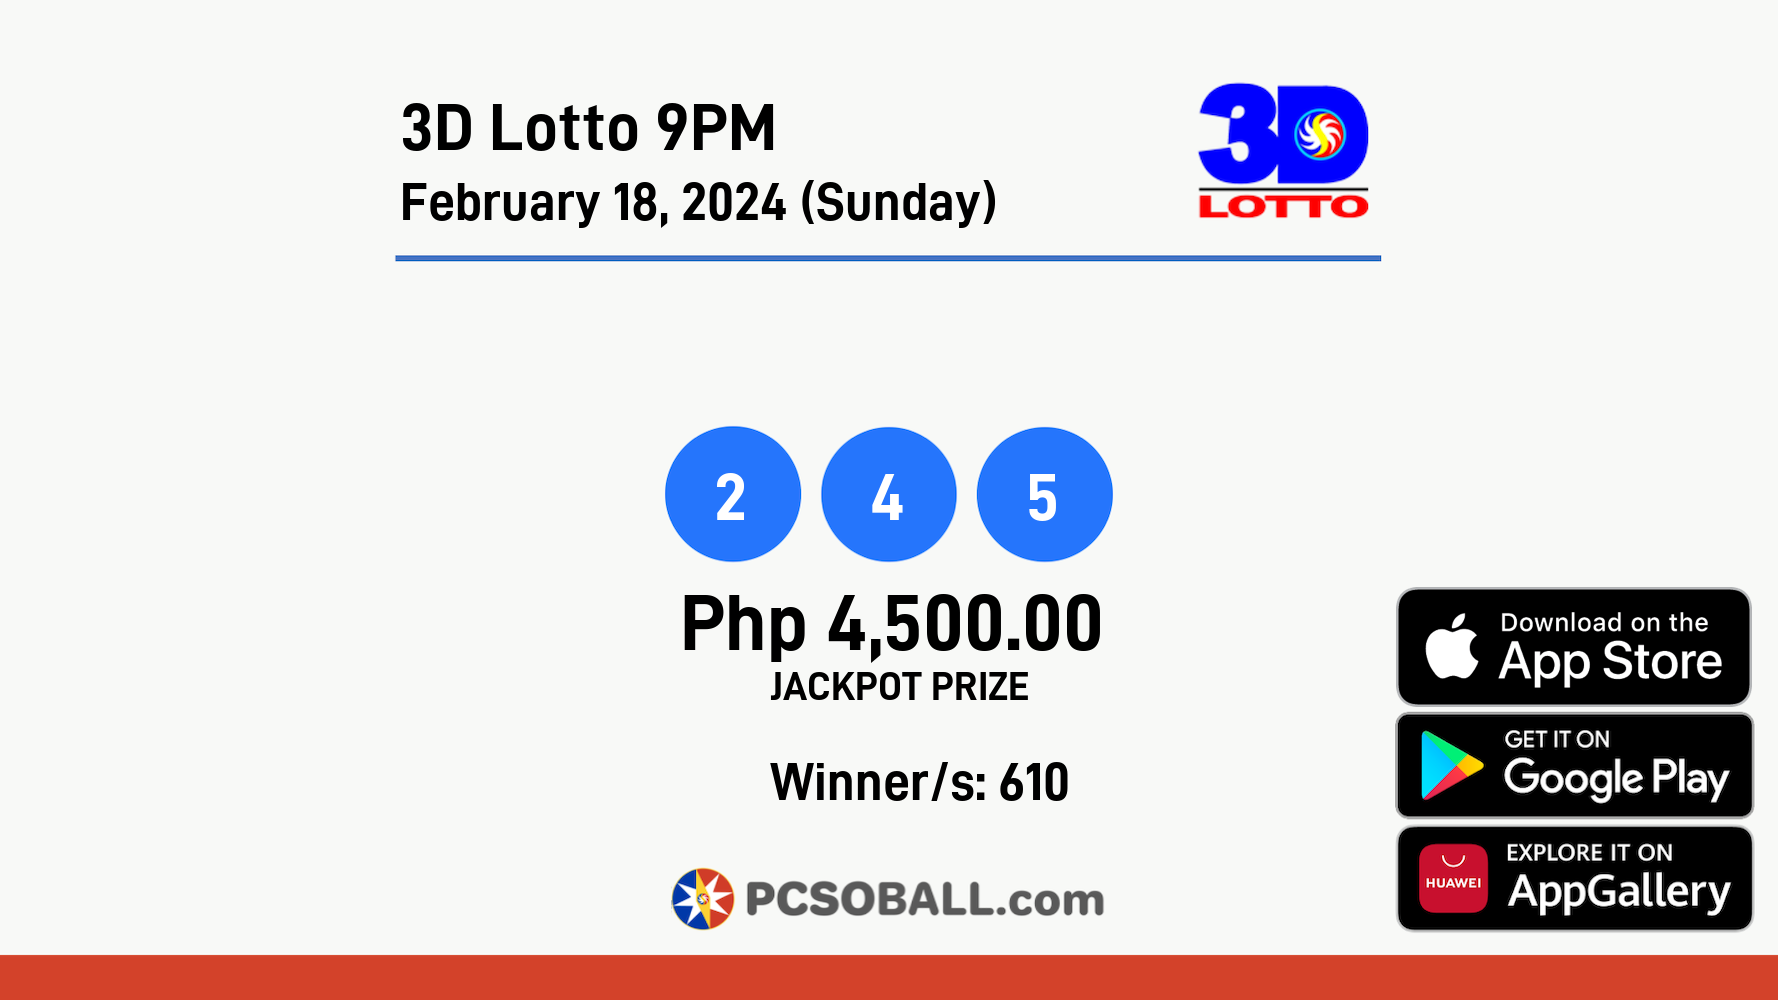 3D Lotto 9PM February 18, 2024 (Sunday) Result